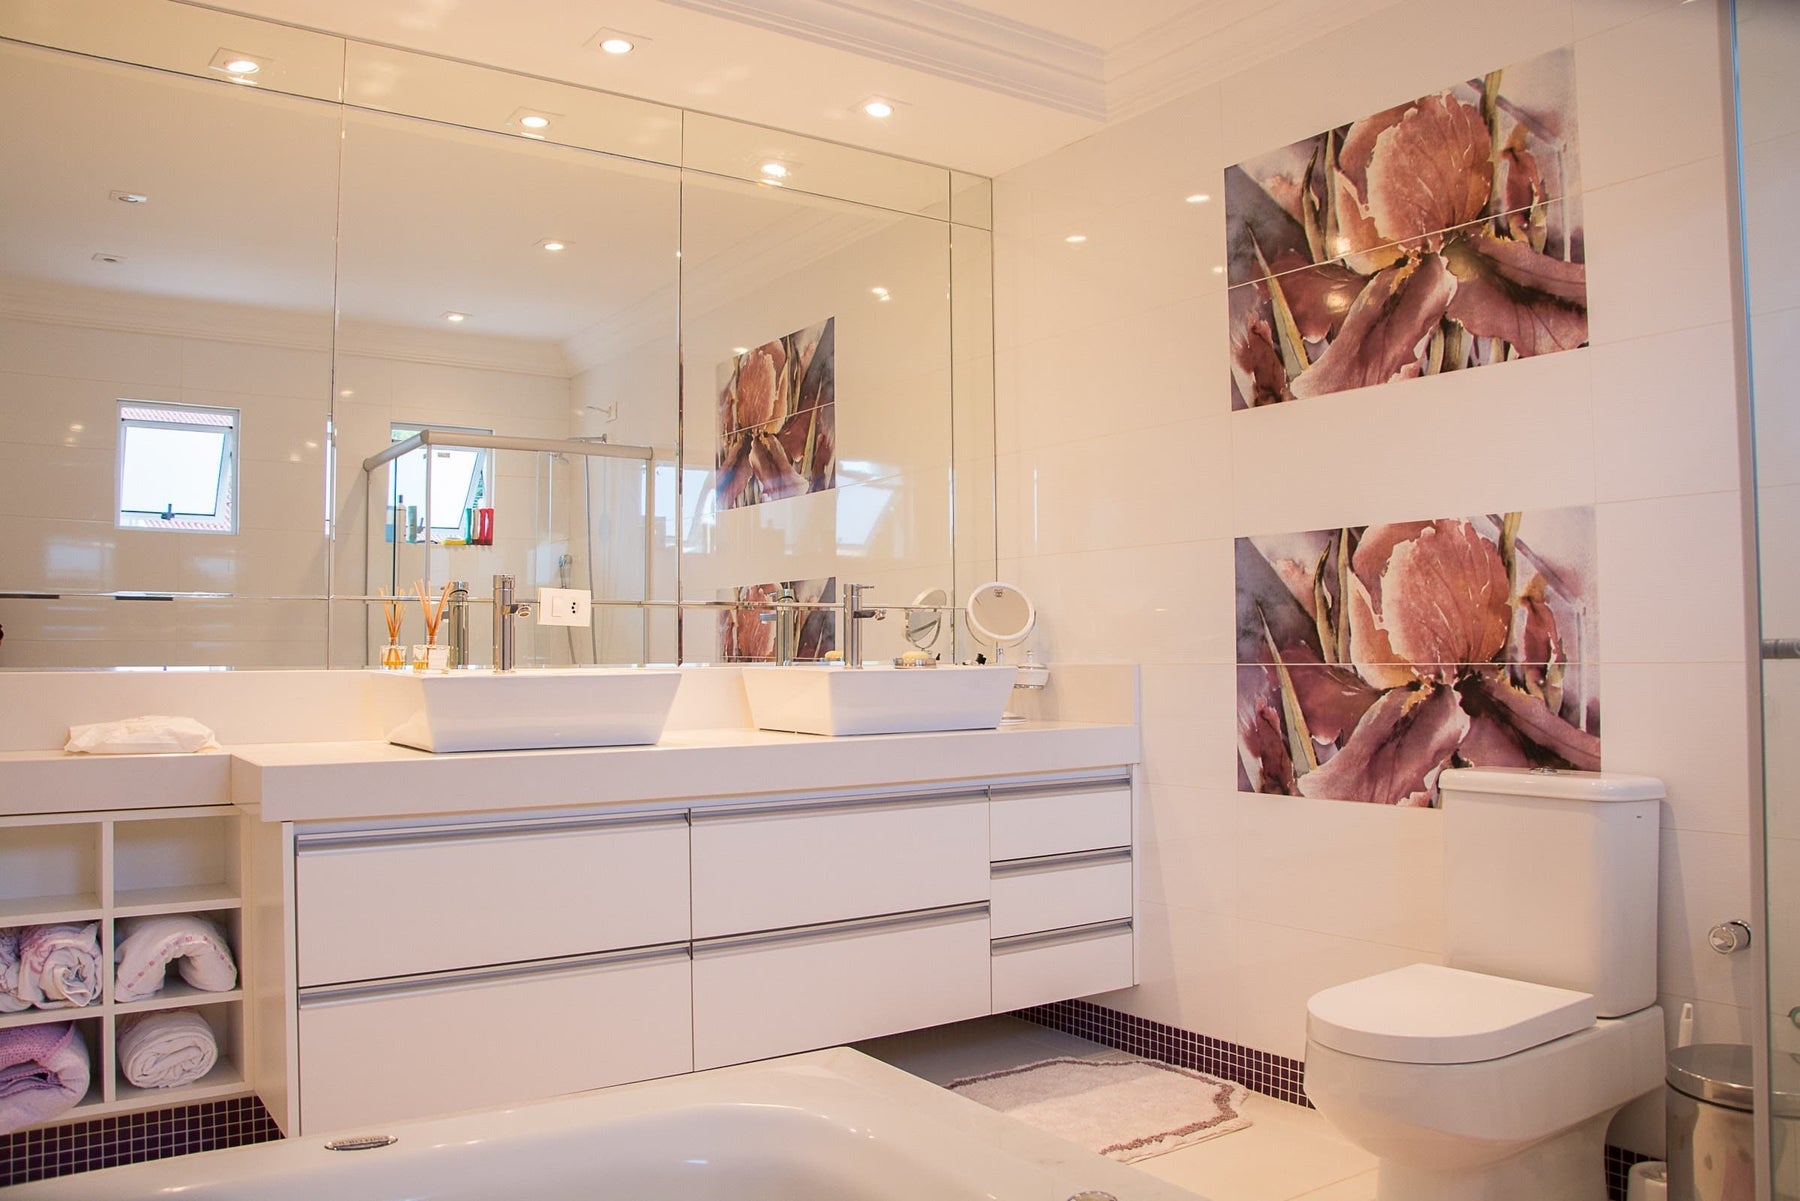 5 Fast and Easy Ways to Makeover Your Bathroom